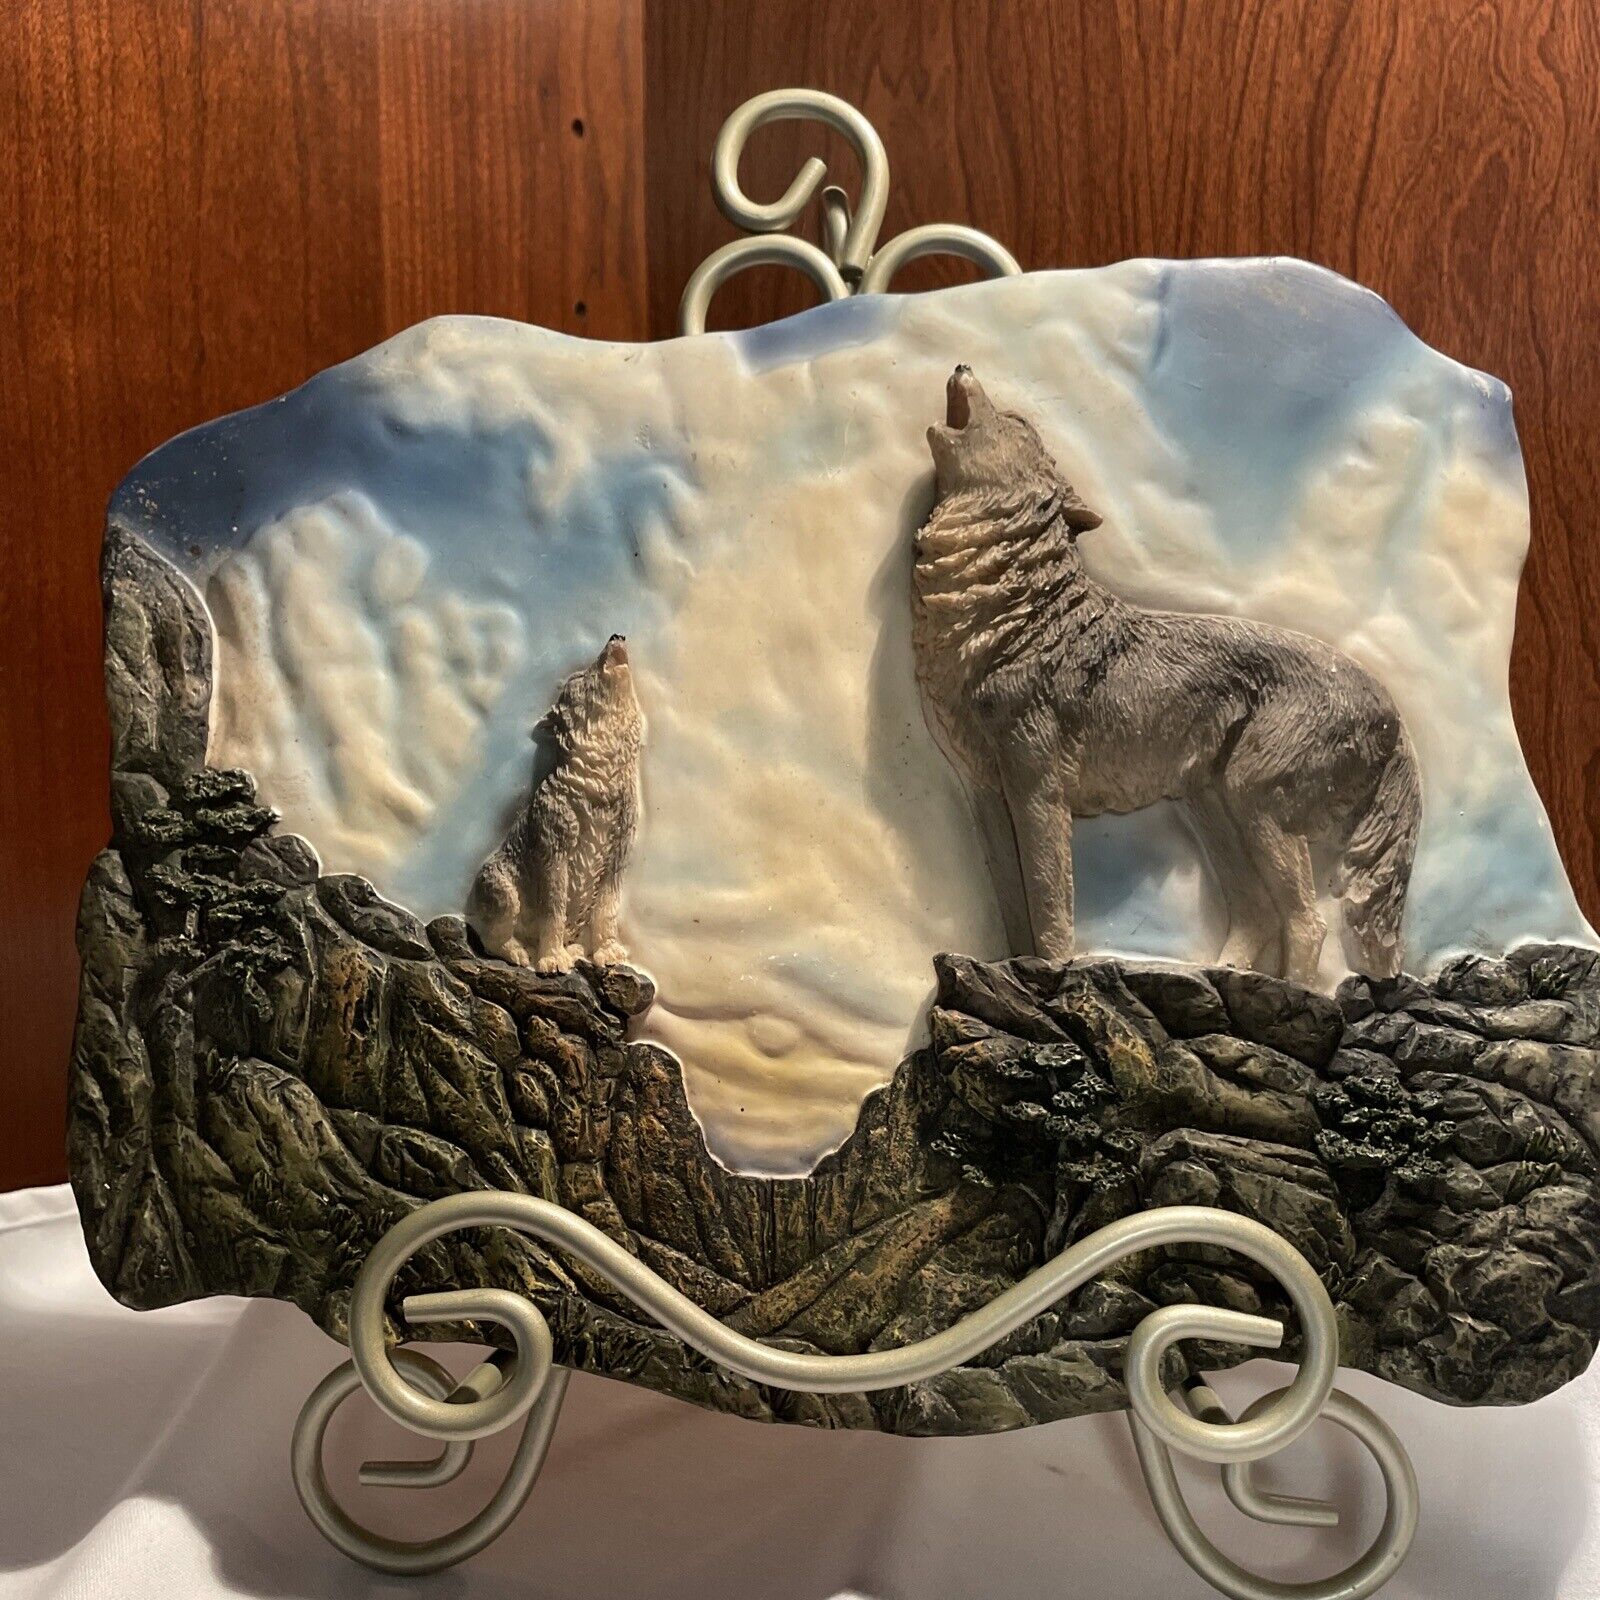 3D Wolfs Howl Folk Art Figurine In Oval Resin Wall Plaque, Wall Hanging 11.75x9